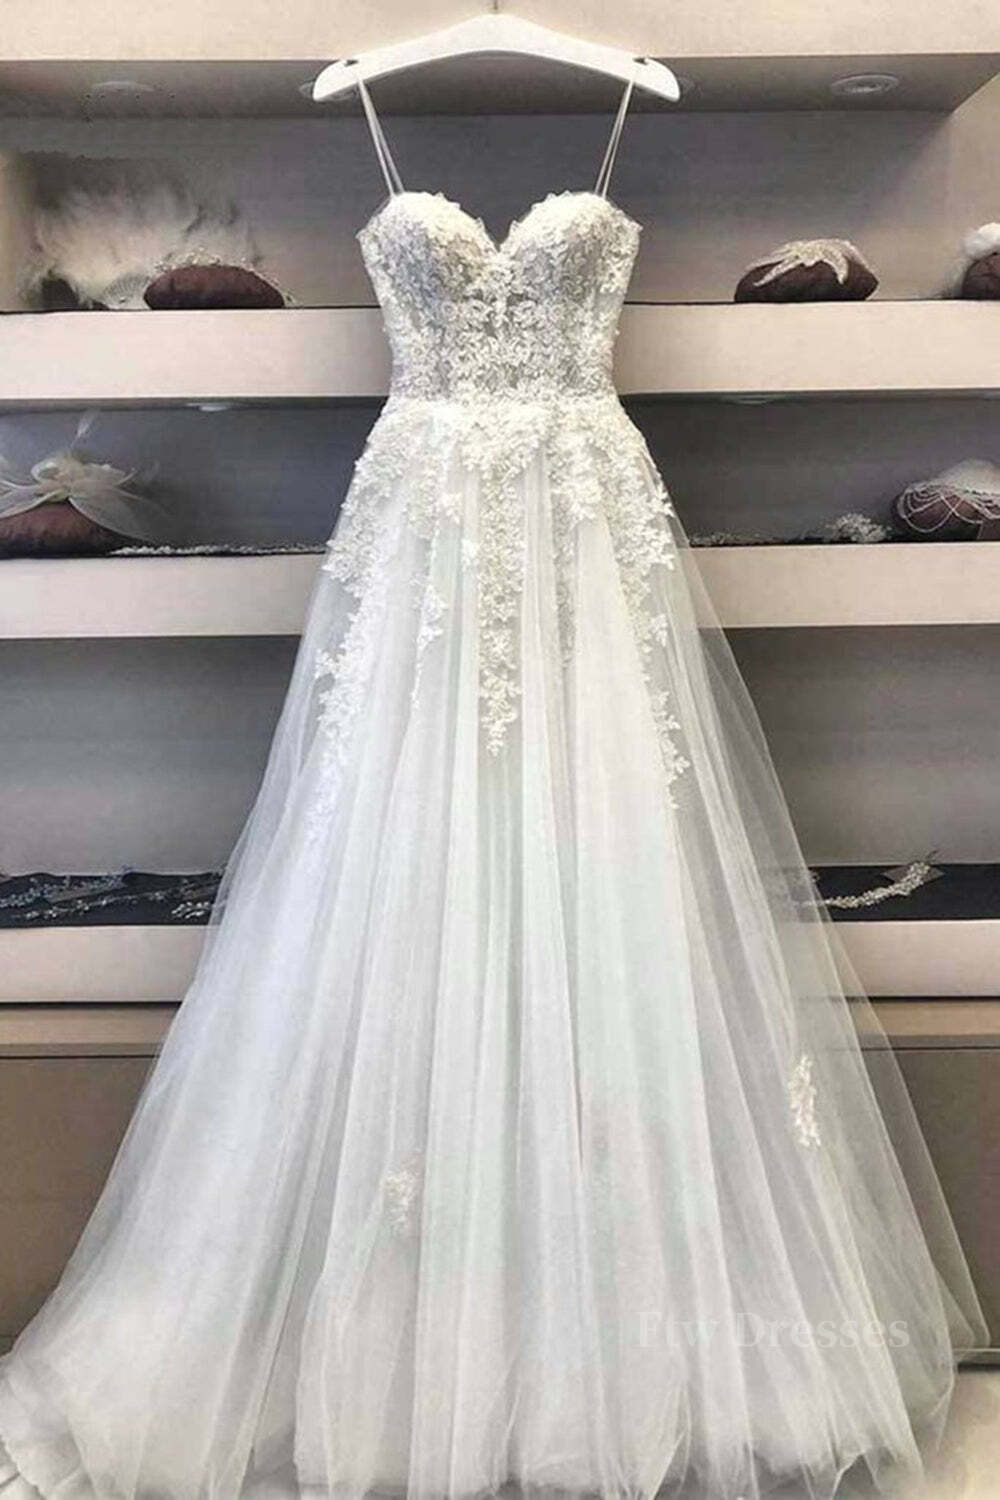 Princess Sweetheart Neck White Lace Prom Wedding Dresses, Ivory Lace Formal Dresses, White Evening Dresses